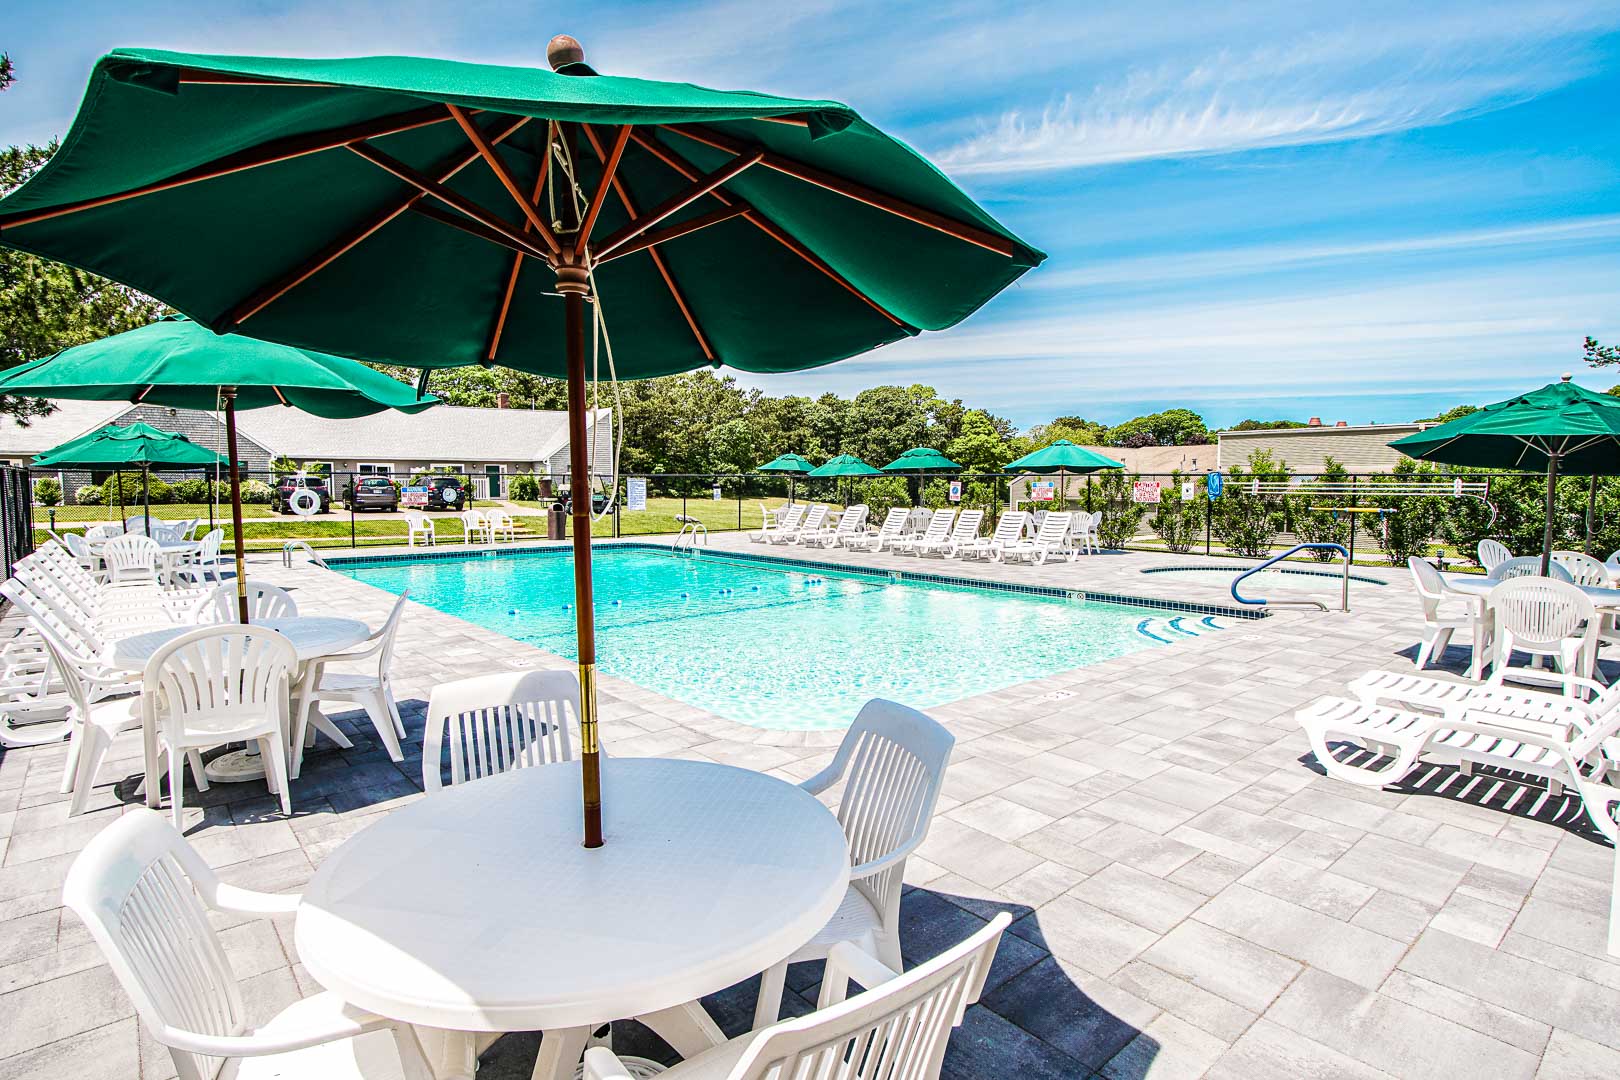 A relaxing swimming pool area at VRI's Brewster Green Resort in Massachusetts.